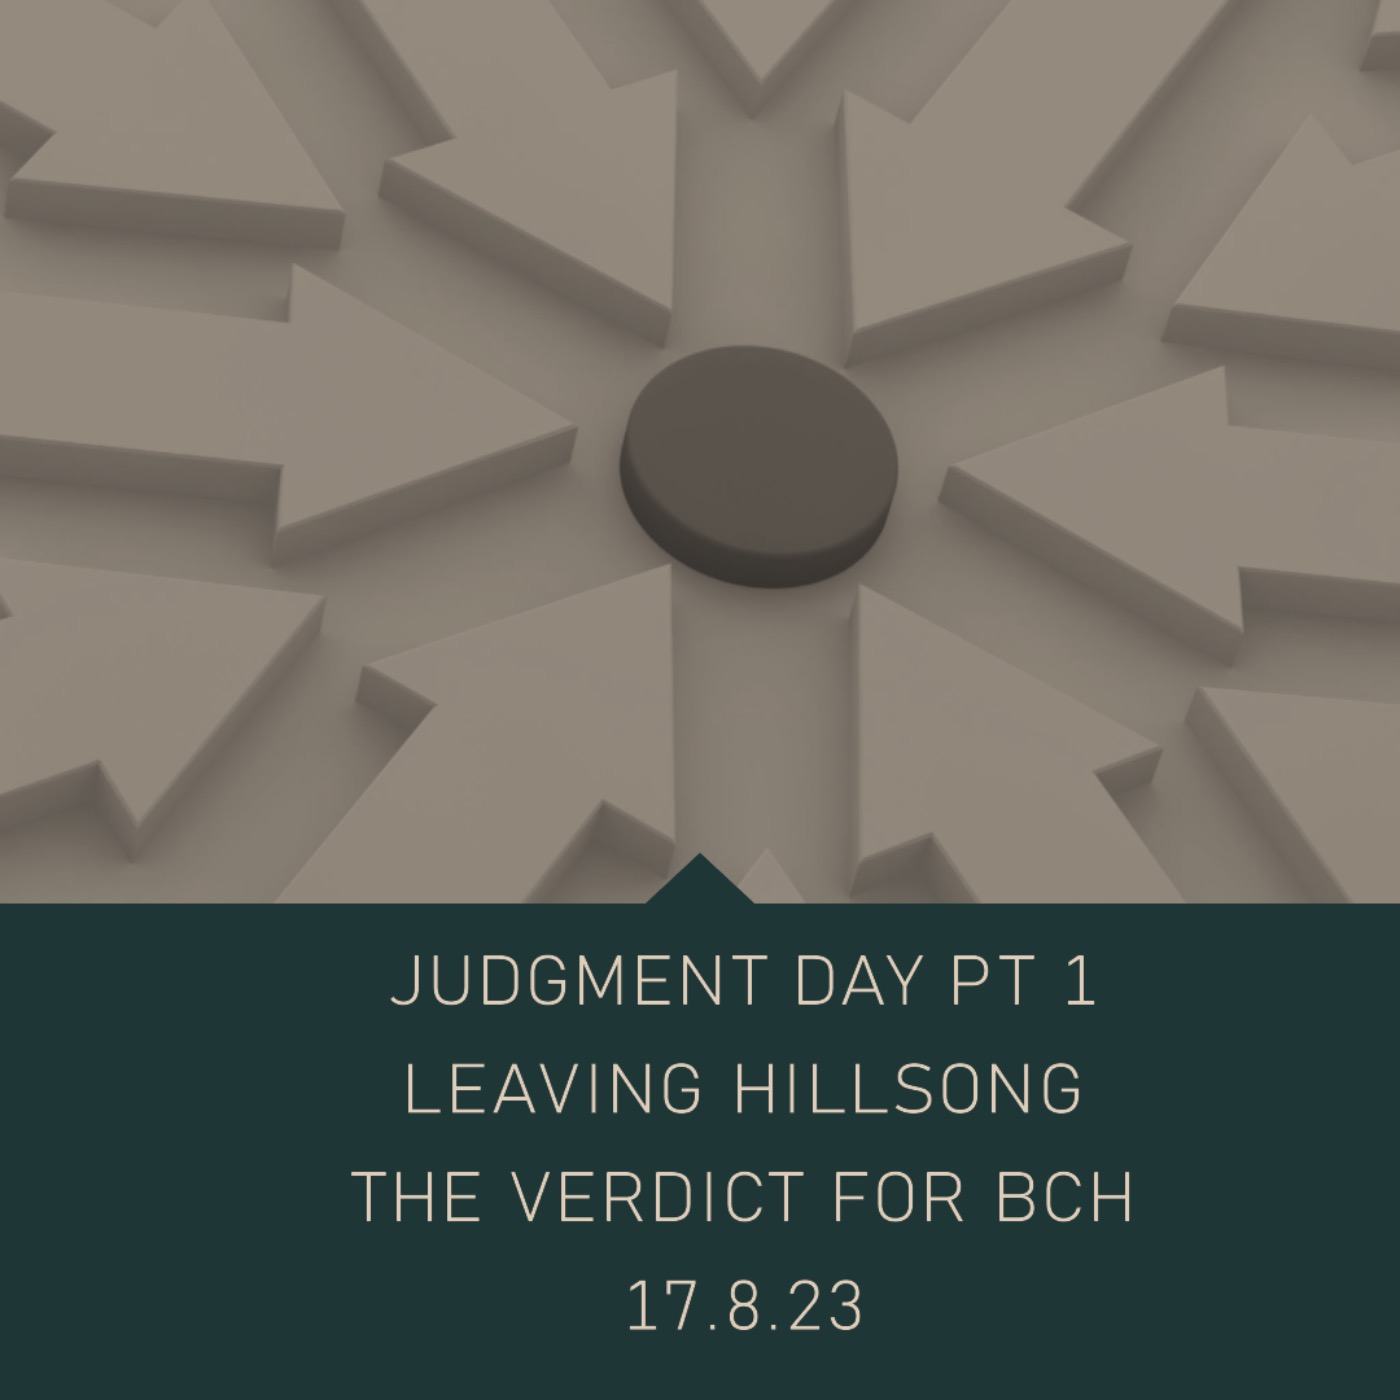 Judgment Day pt 1